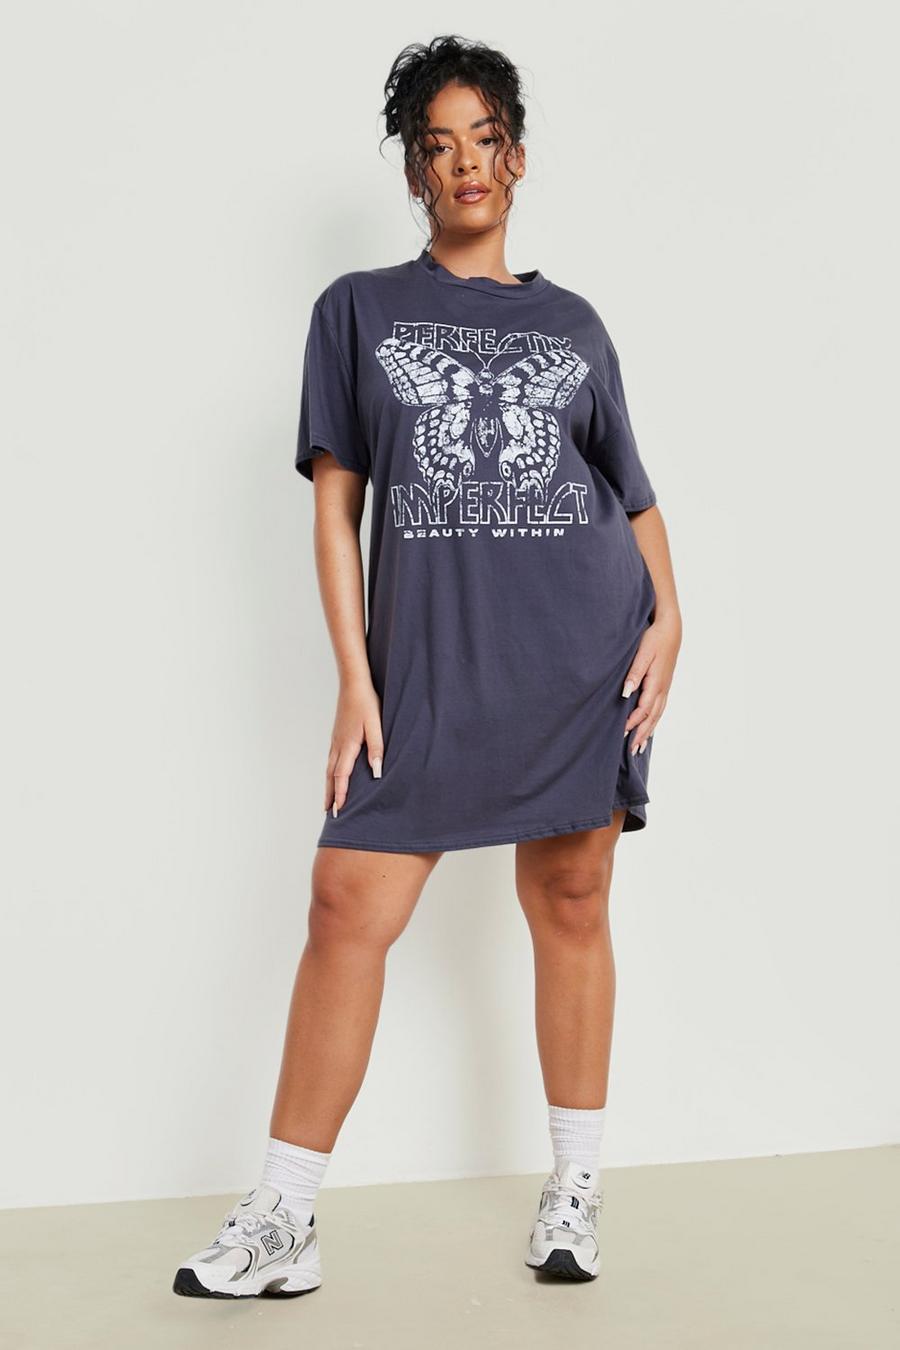 Charcoal gris Plus Perfectly Imperfect Slogan T-shirt Dress